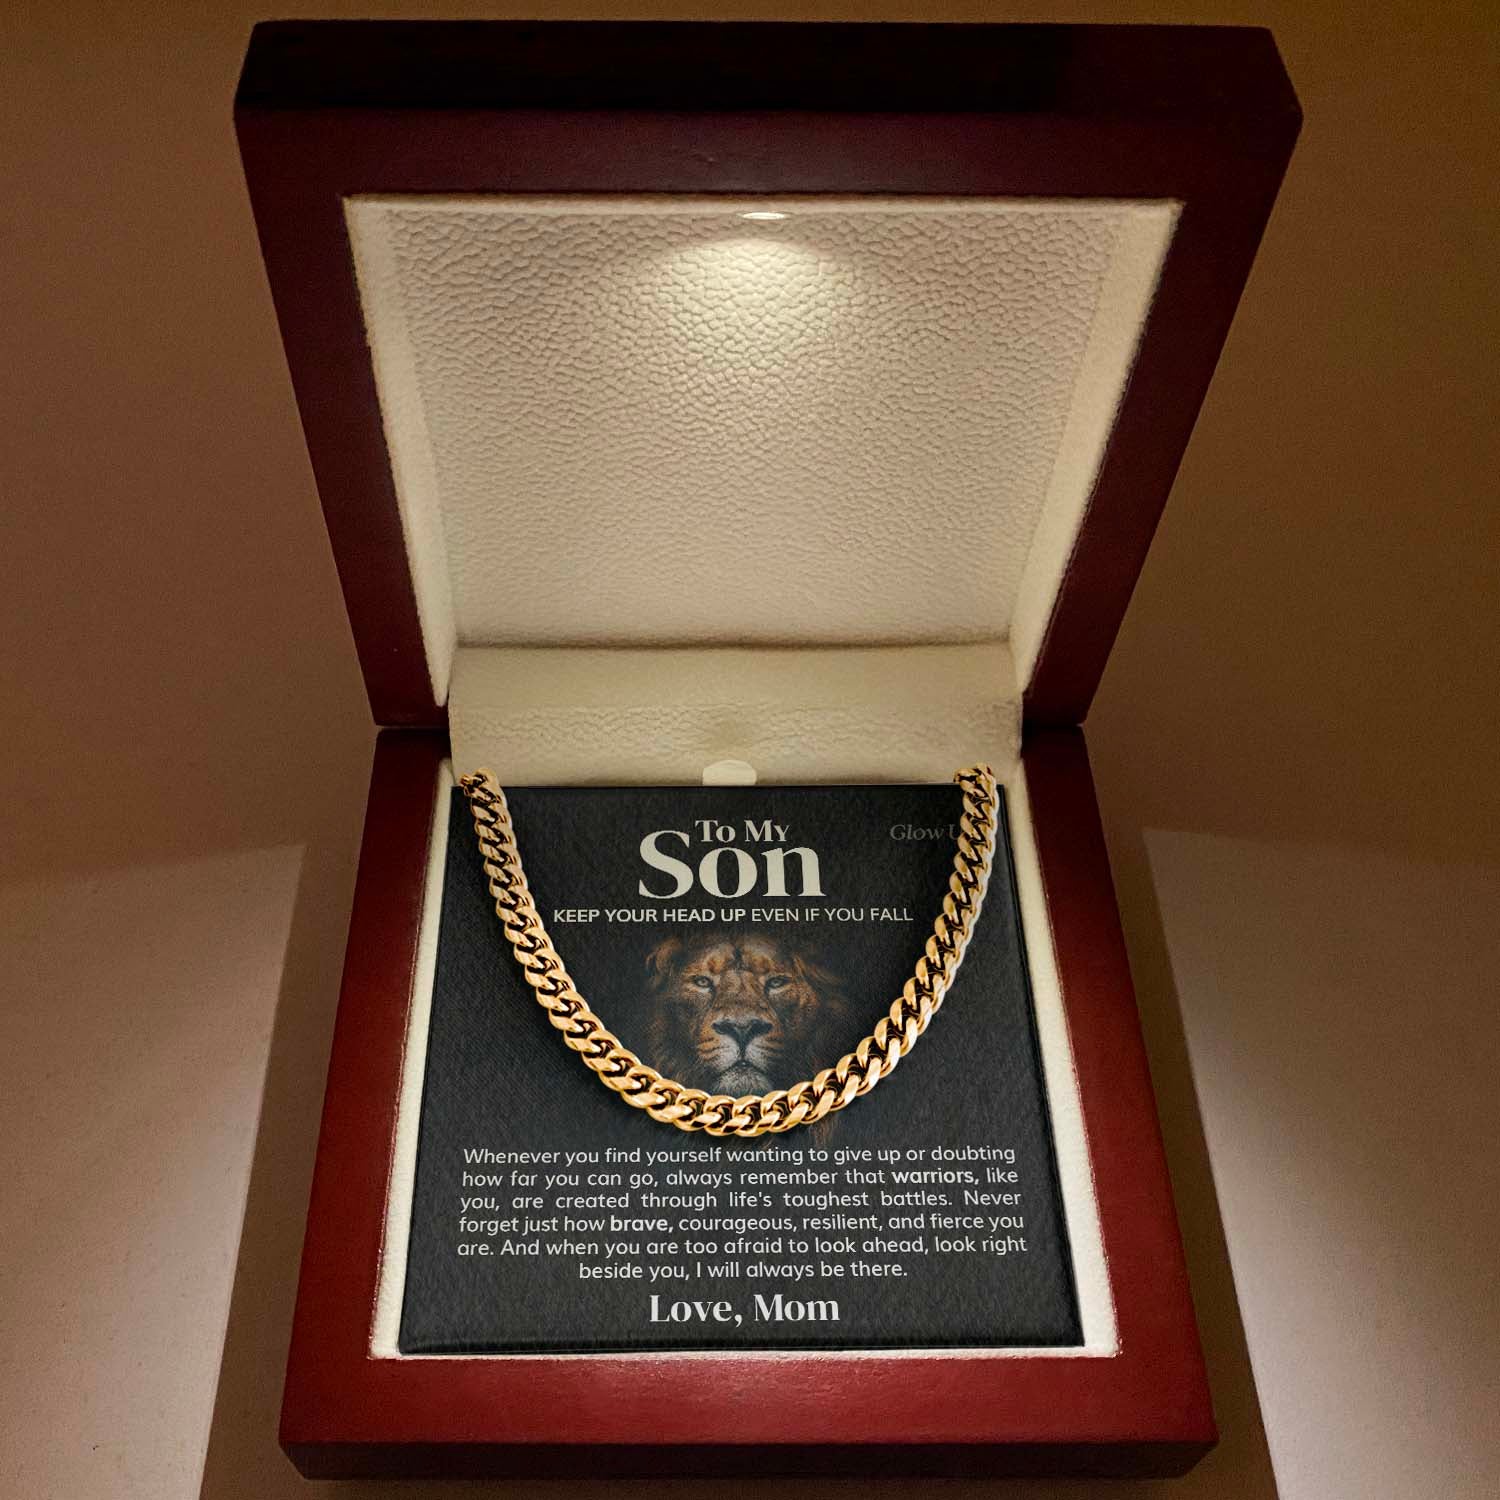 GlowUp 18k Gold Finish / Luxury LED Box To My Son - Keep your head up even if you fall - Cuban Link Chain Necklace